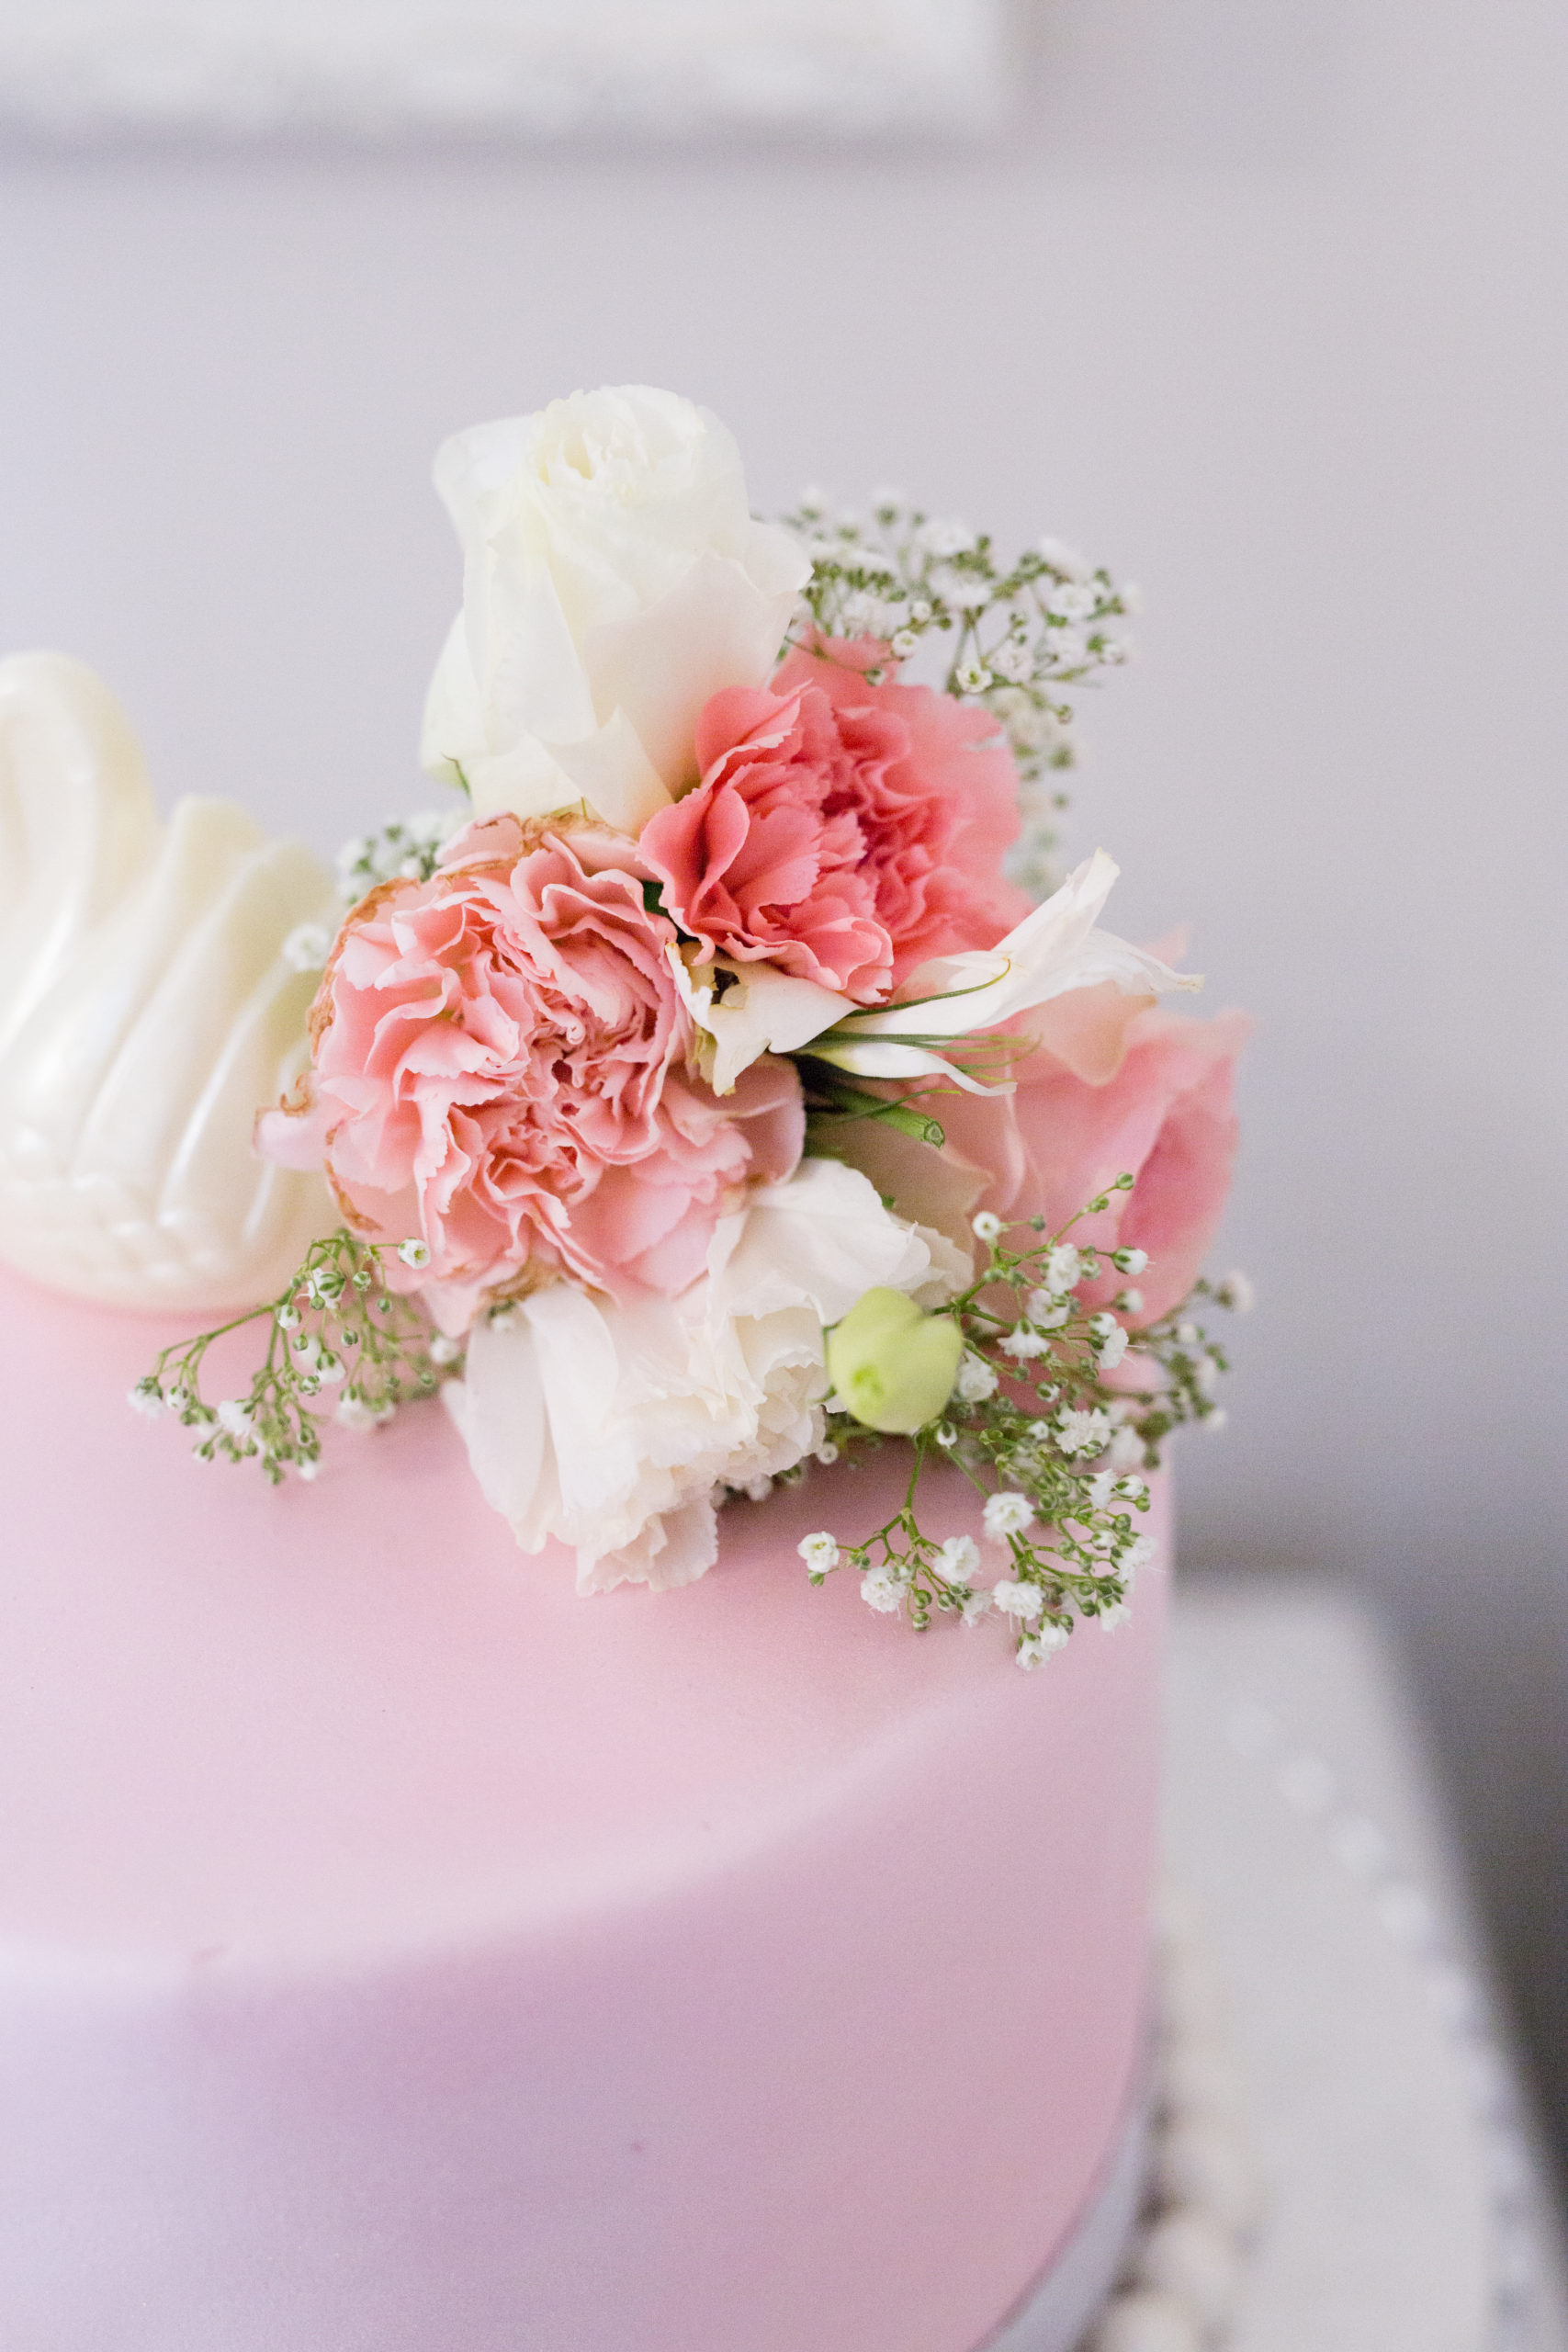 A pretty pink celebration cake with a white chocolate swan and  fresh flowers as decorations